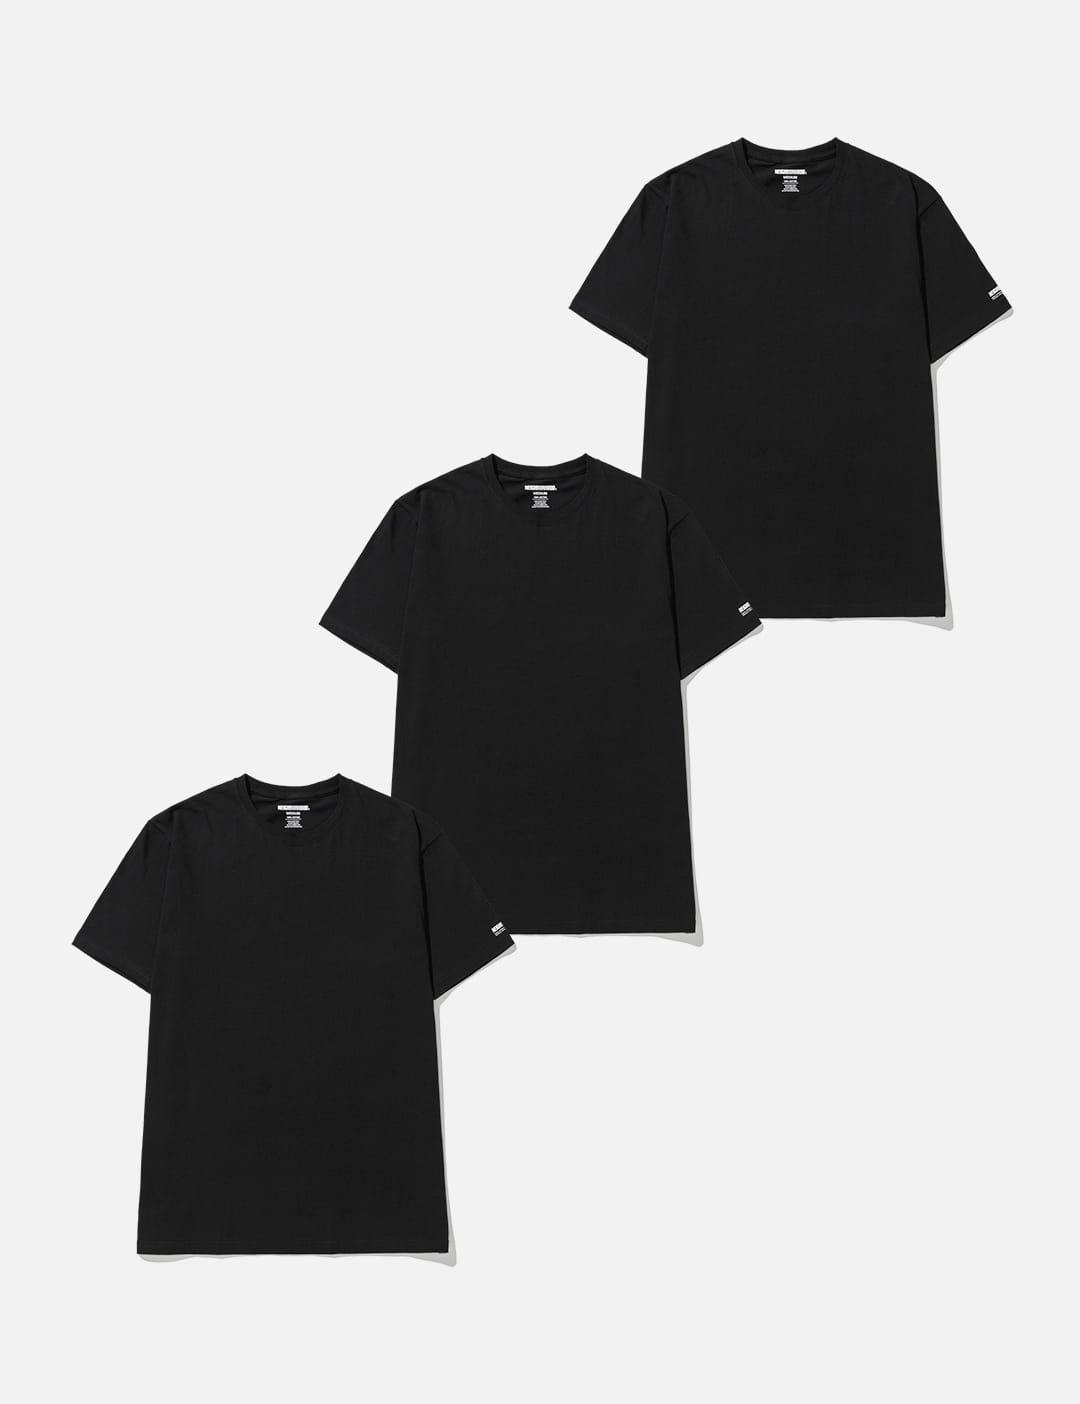 TIGHTBOOTH - Sit On It T-shirt | HBX - Globally Curated Fashion 